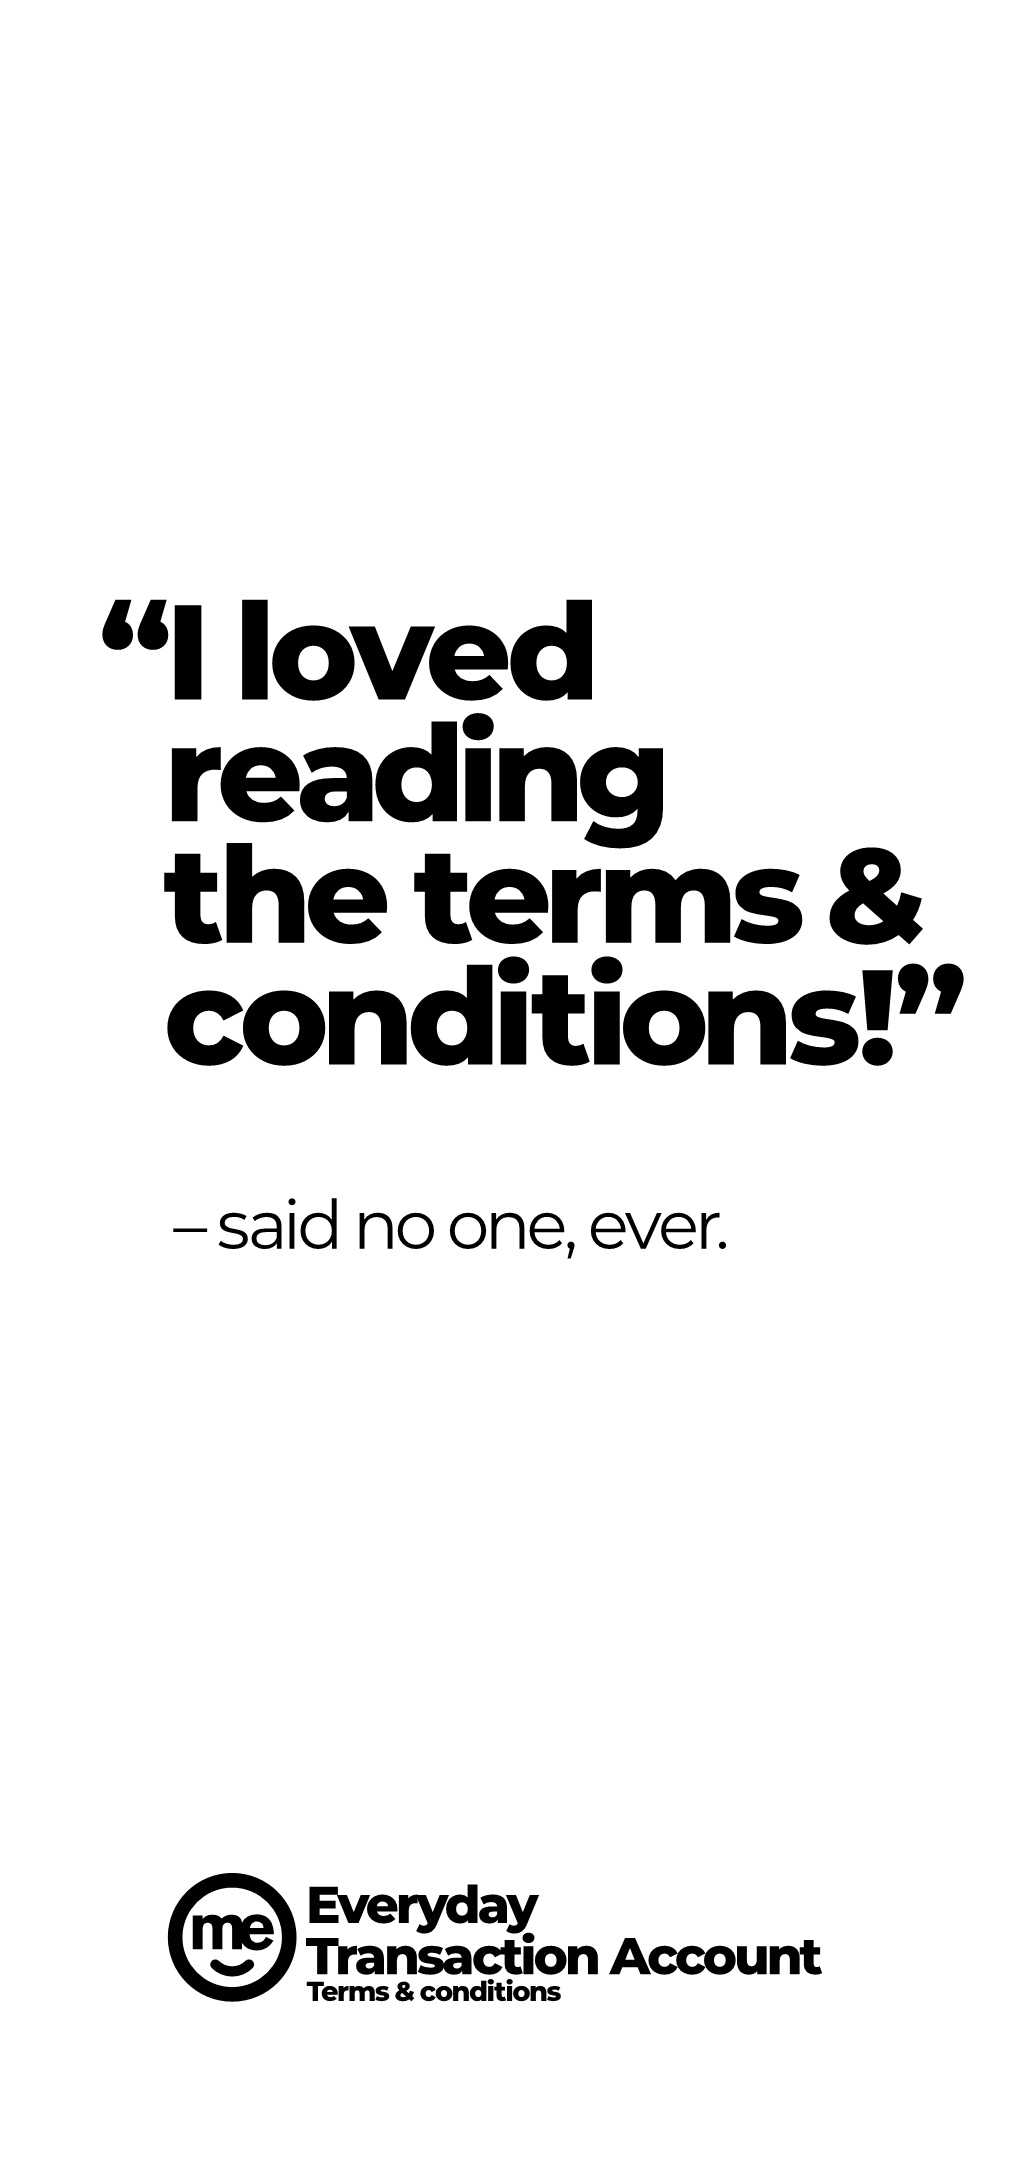 “I Loved Reading the Terms & Conditions!”